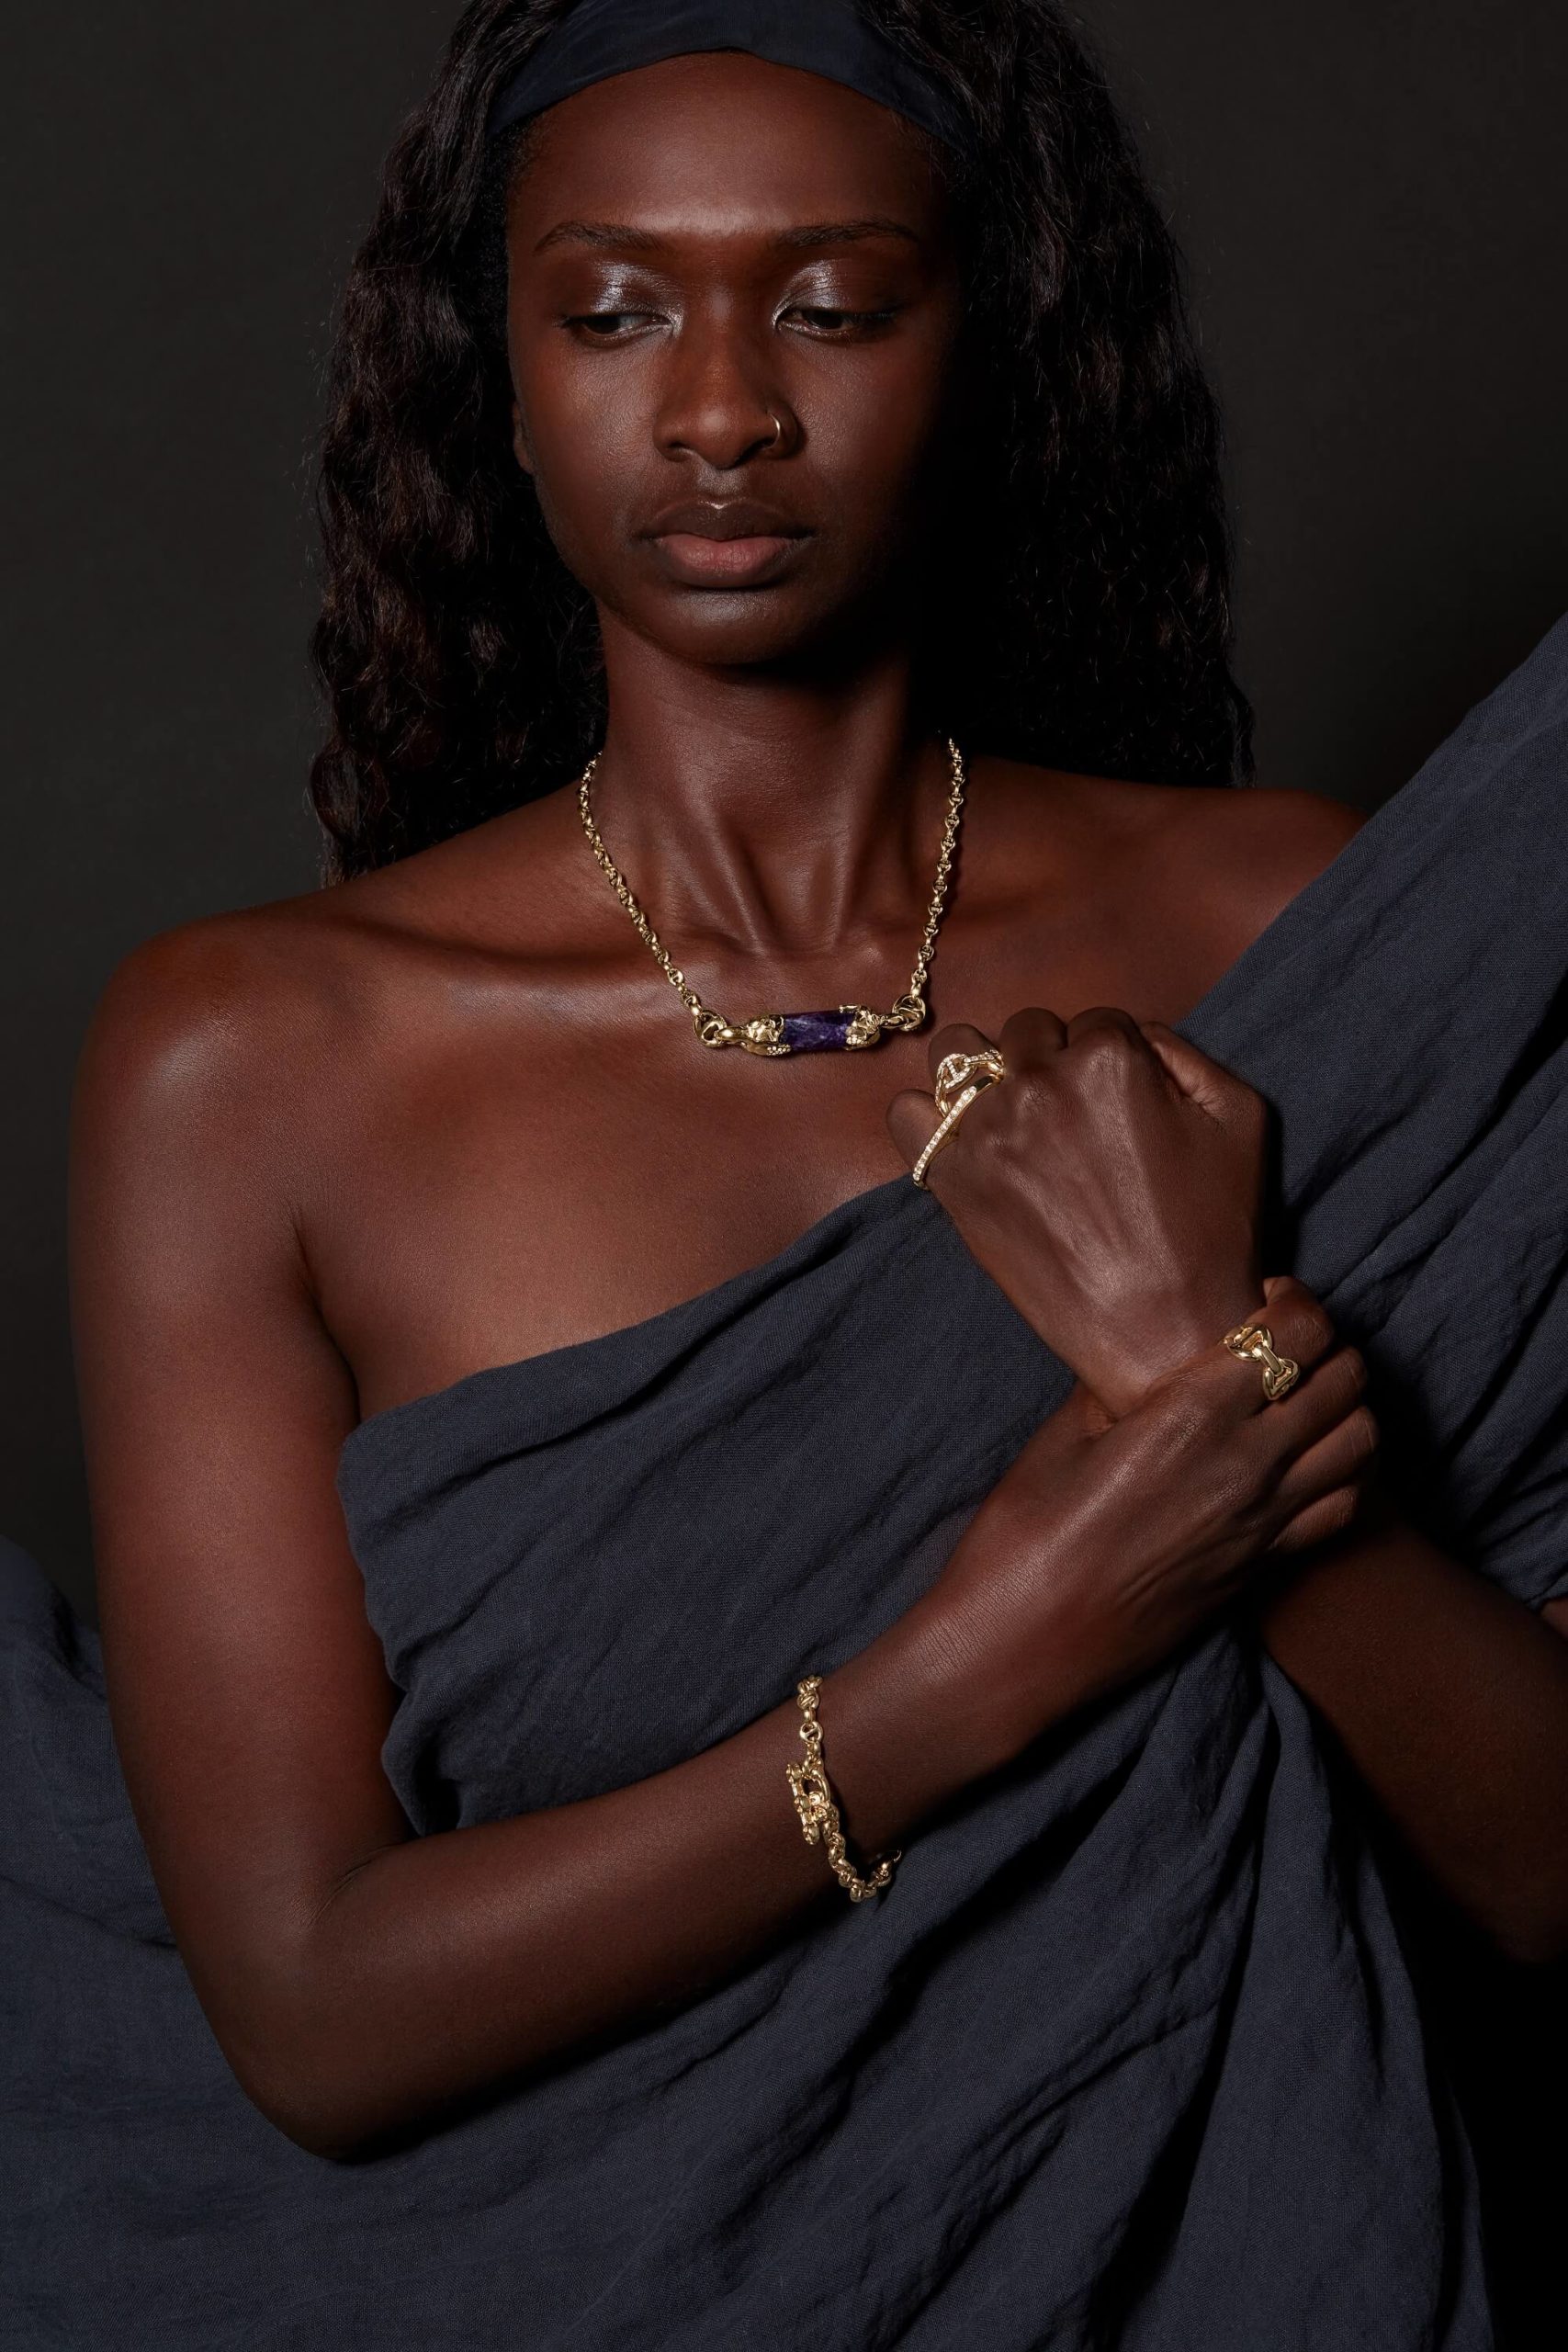 A Tribal look alike female model with bracelet , rings and necklace